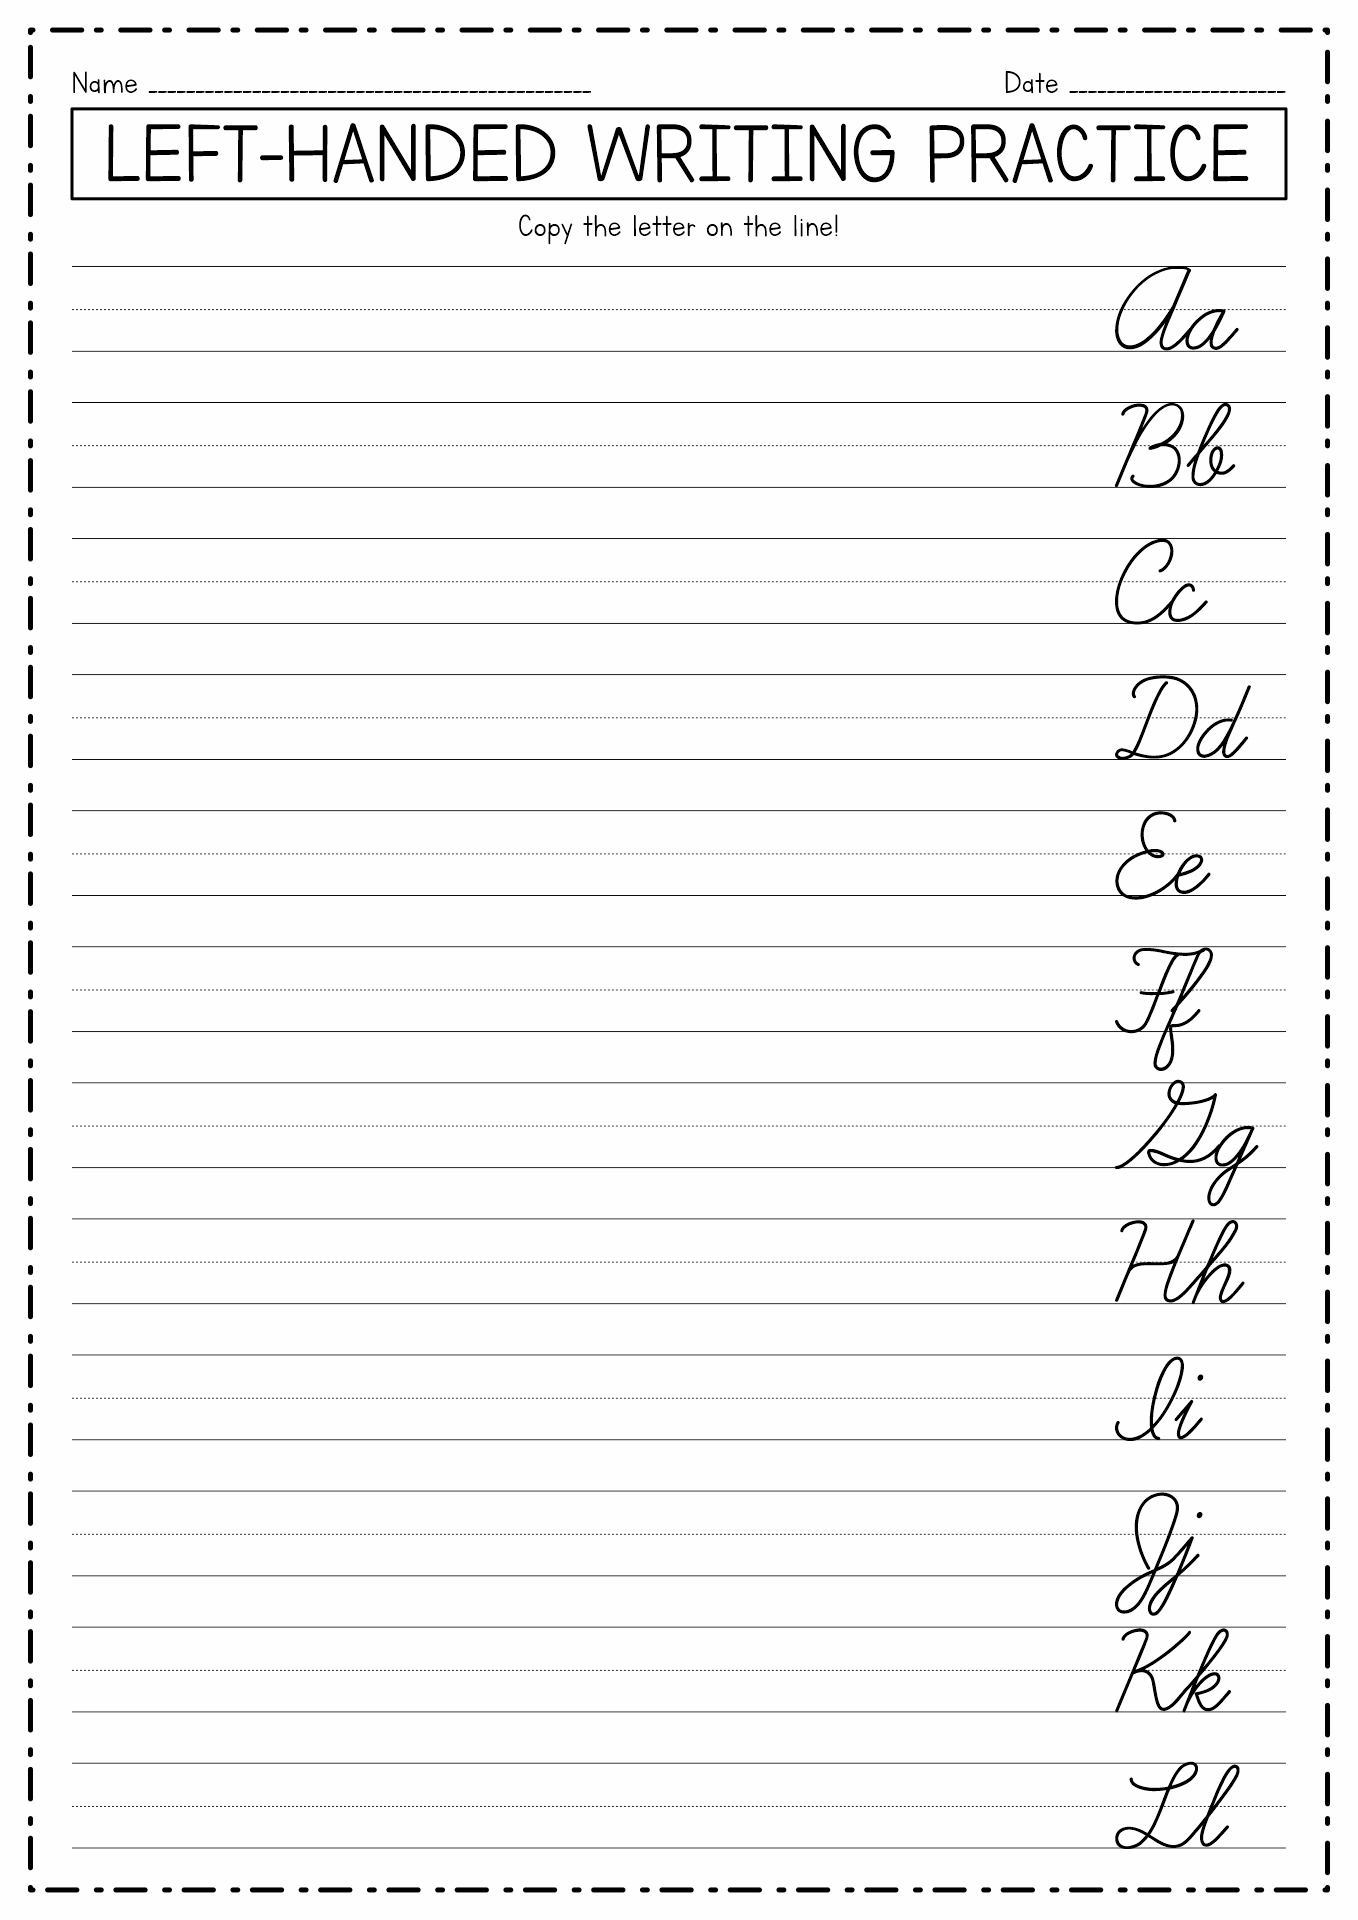 Left-Handed Cursive Writing Practice Sheets